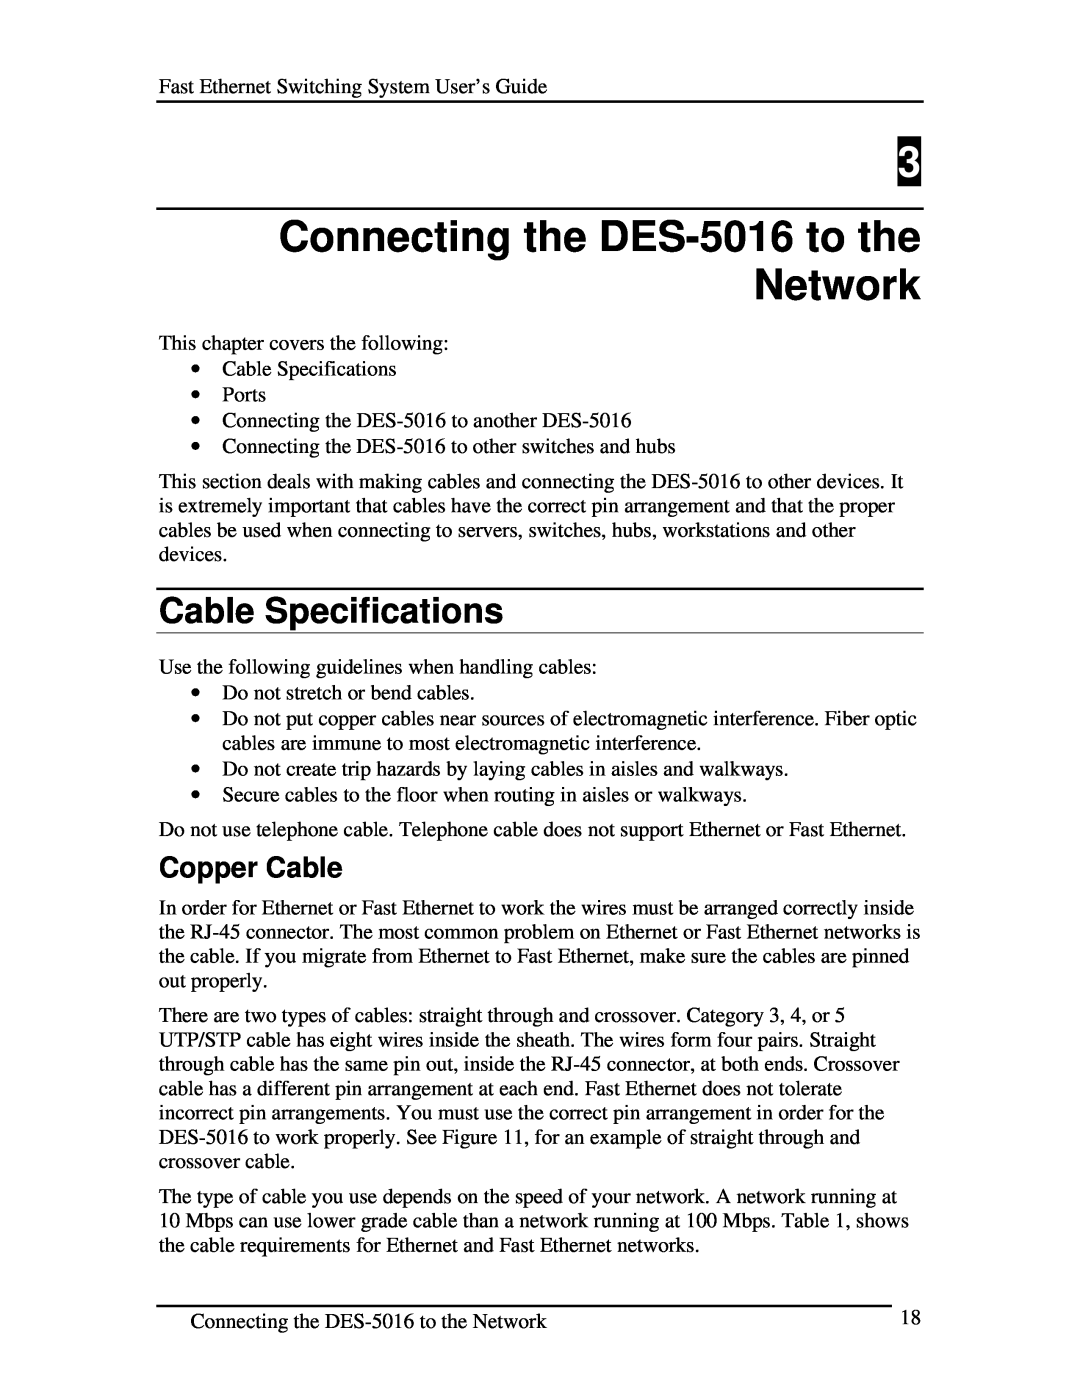 D-Link manual Connecting the DES-5016 to the Network, Cable Specifications, Copper Cable 